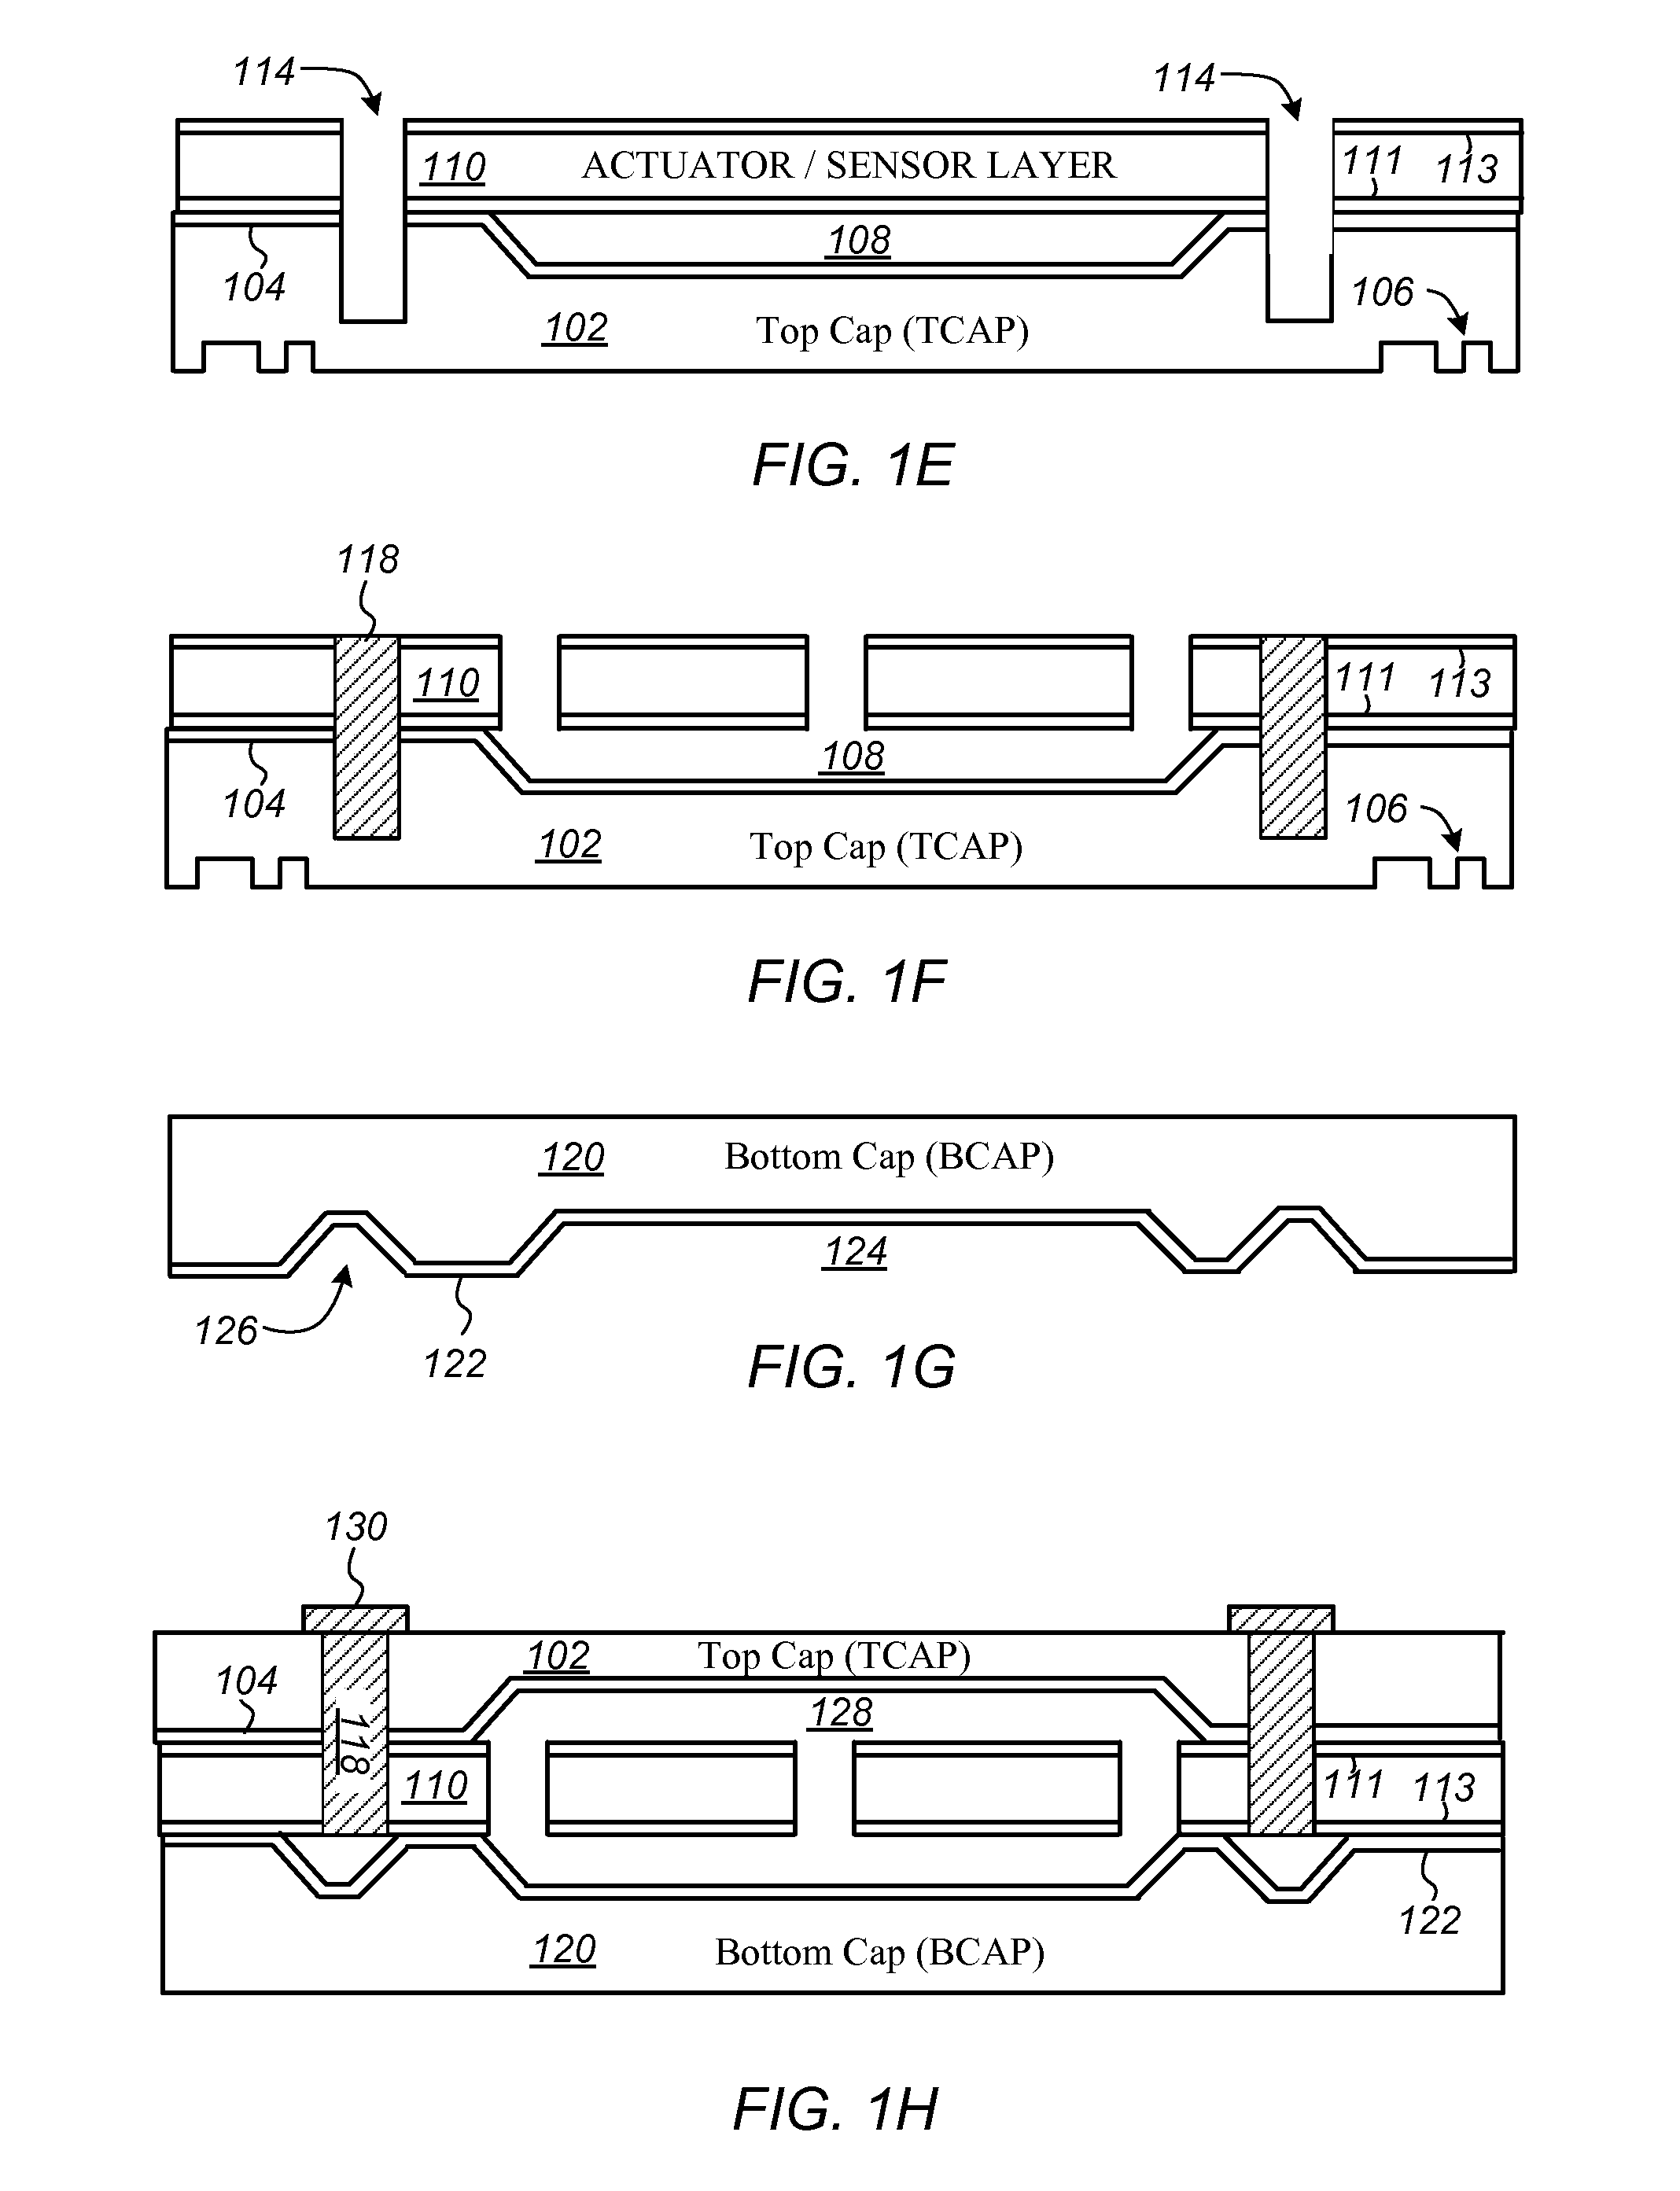 Wafer Level Structures and Methods for Fabricating and Packaging MEMS